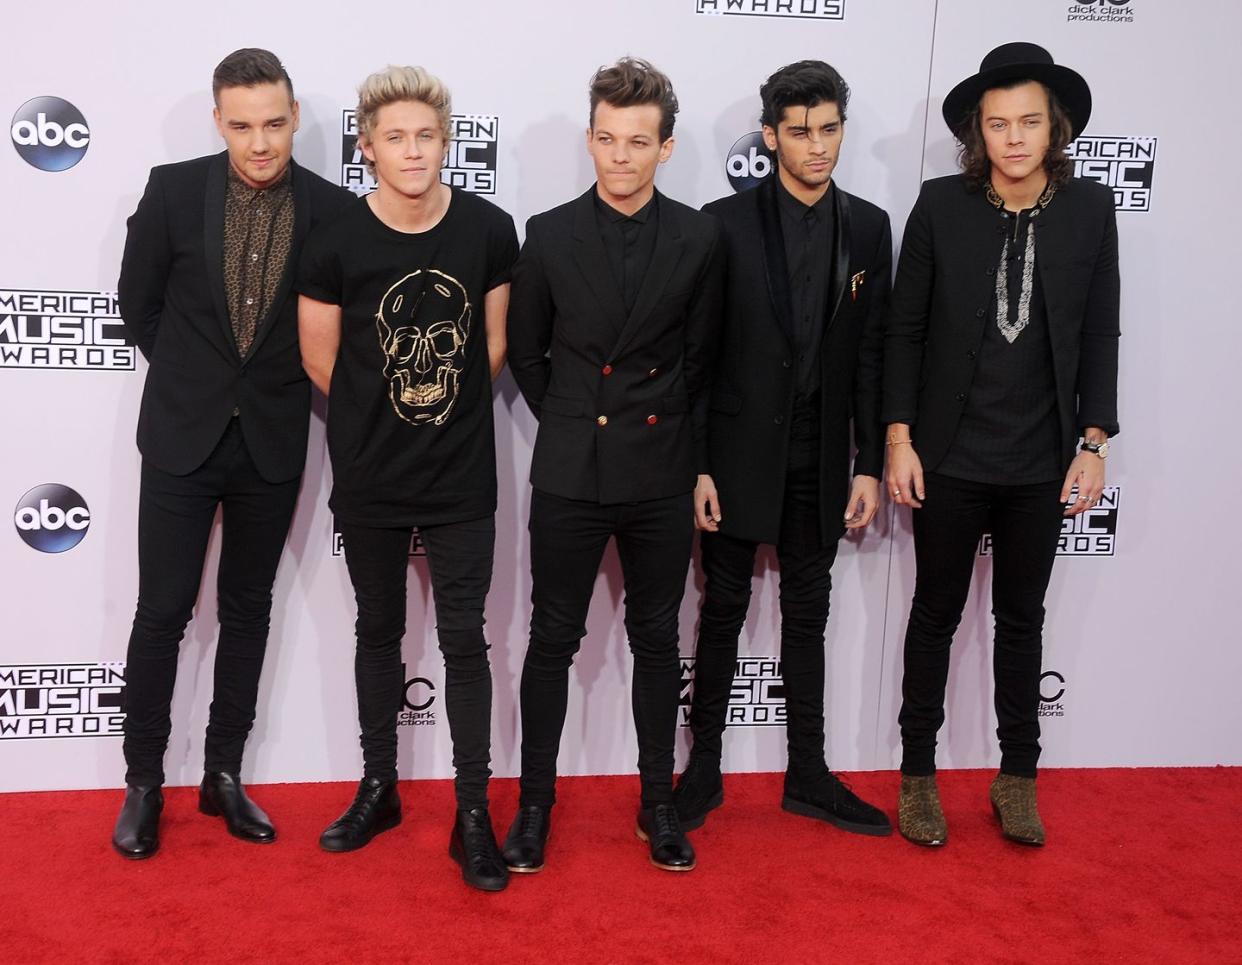 los angeles, ca november 23 musicians liam payne, niall horan, louis tomlinson, zayn malik and harry styles of one direction arrive at the 2014 american music awards at nokia theatre la live on november 23, 2014 in los angeles, california photo by gregg deguirewireimage